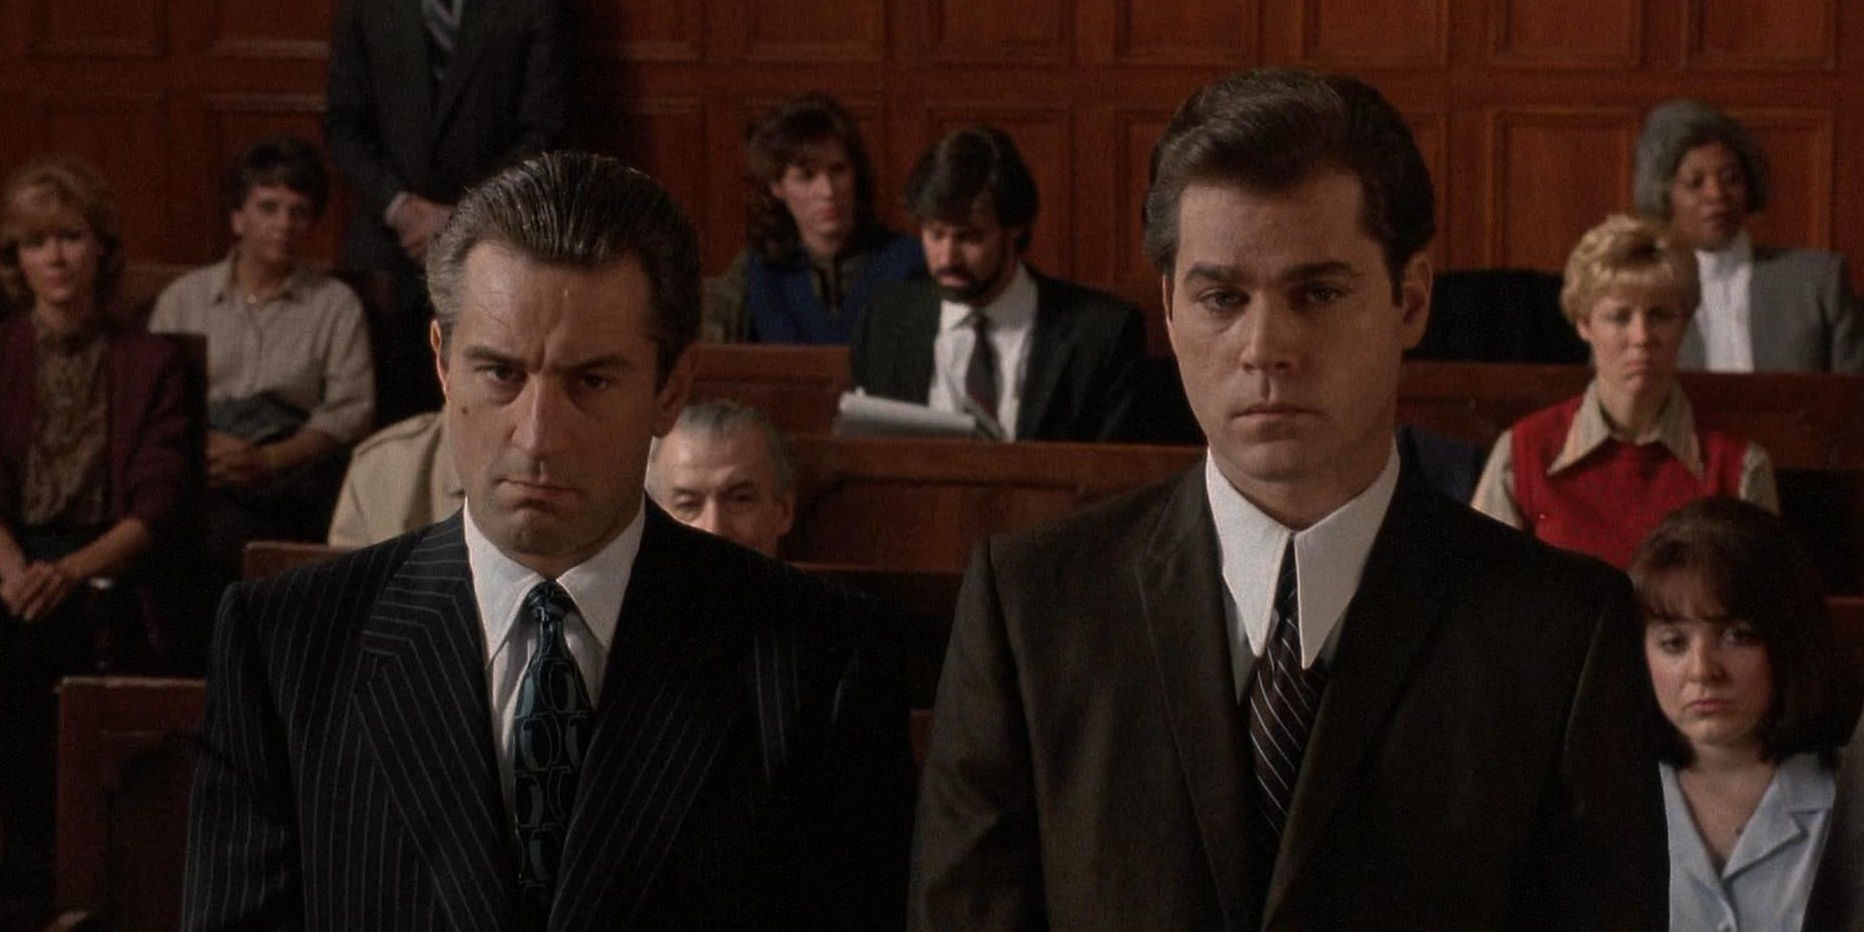 Jimmy attends a court hearing with Henry in Goodfellas